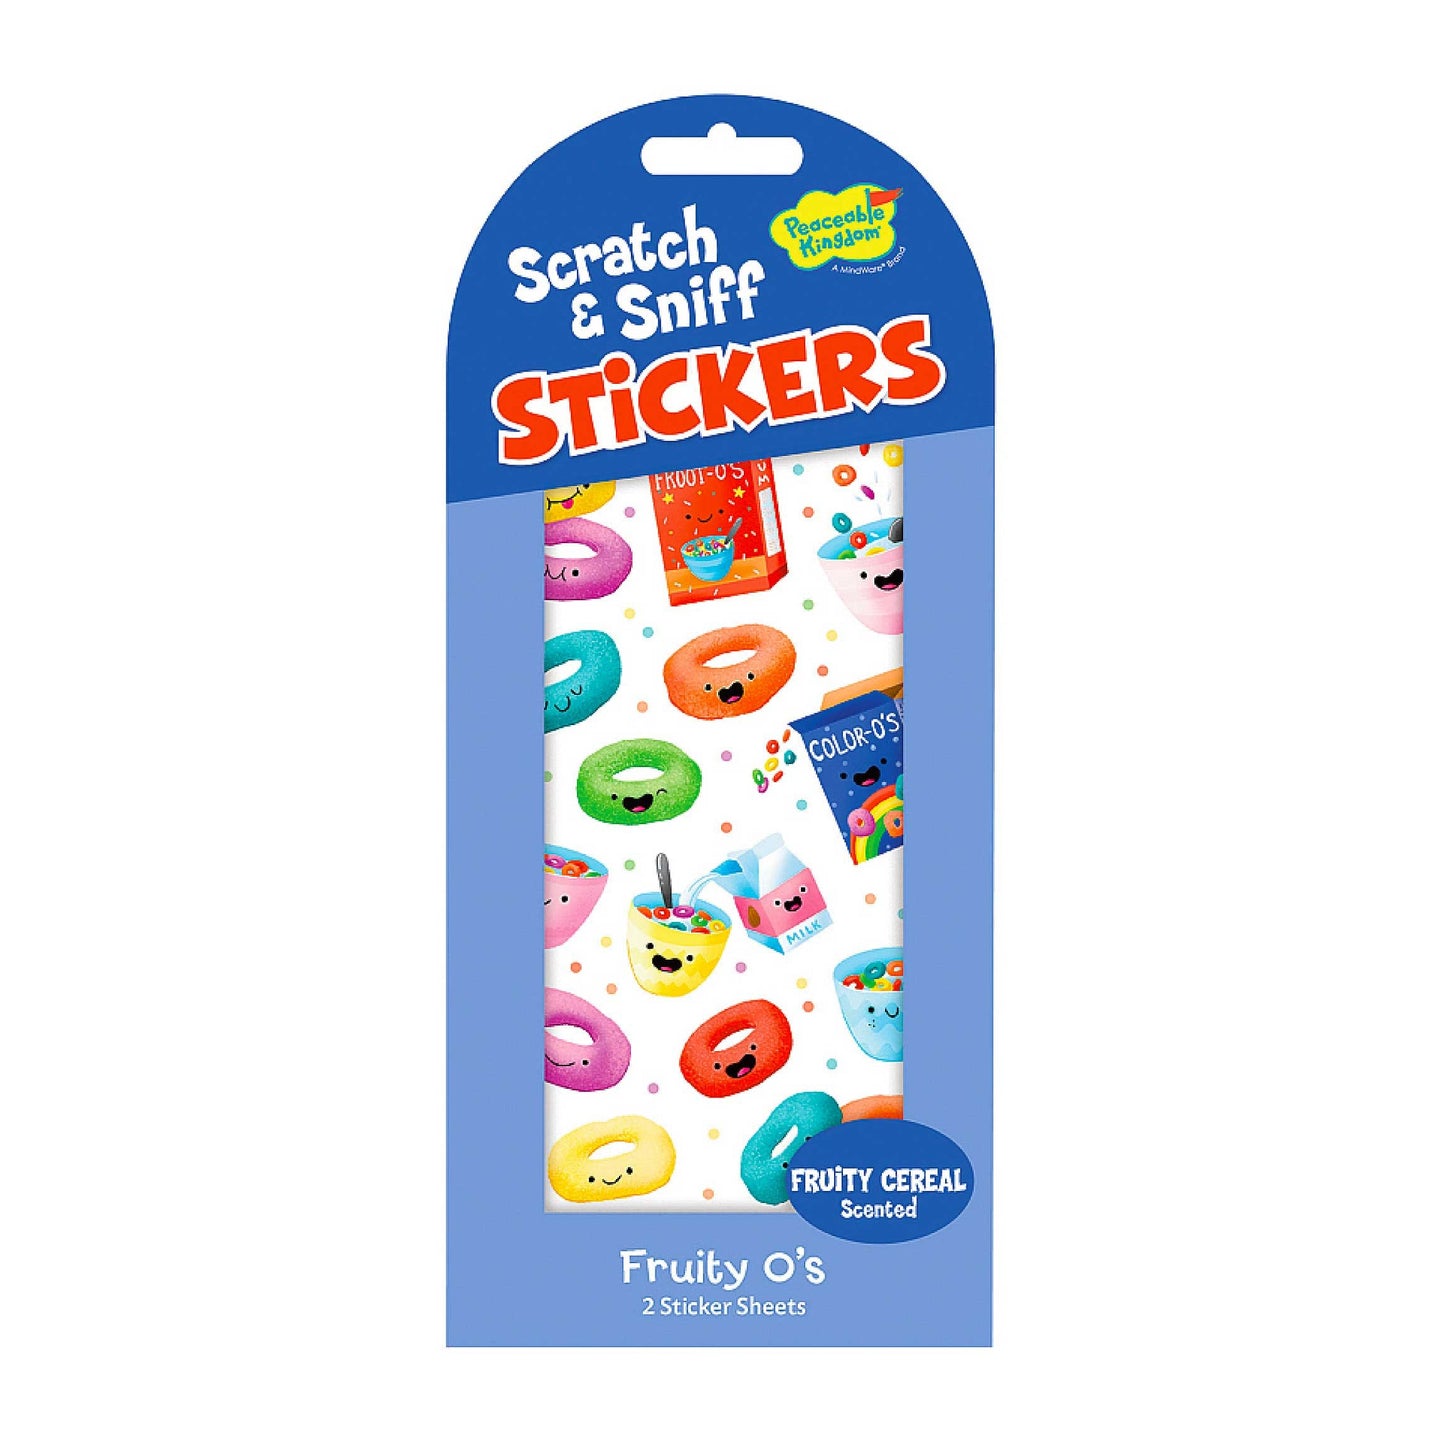 Sticker Fruity O’s Scratch and Sniff